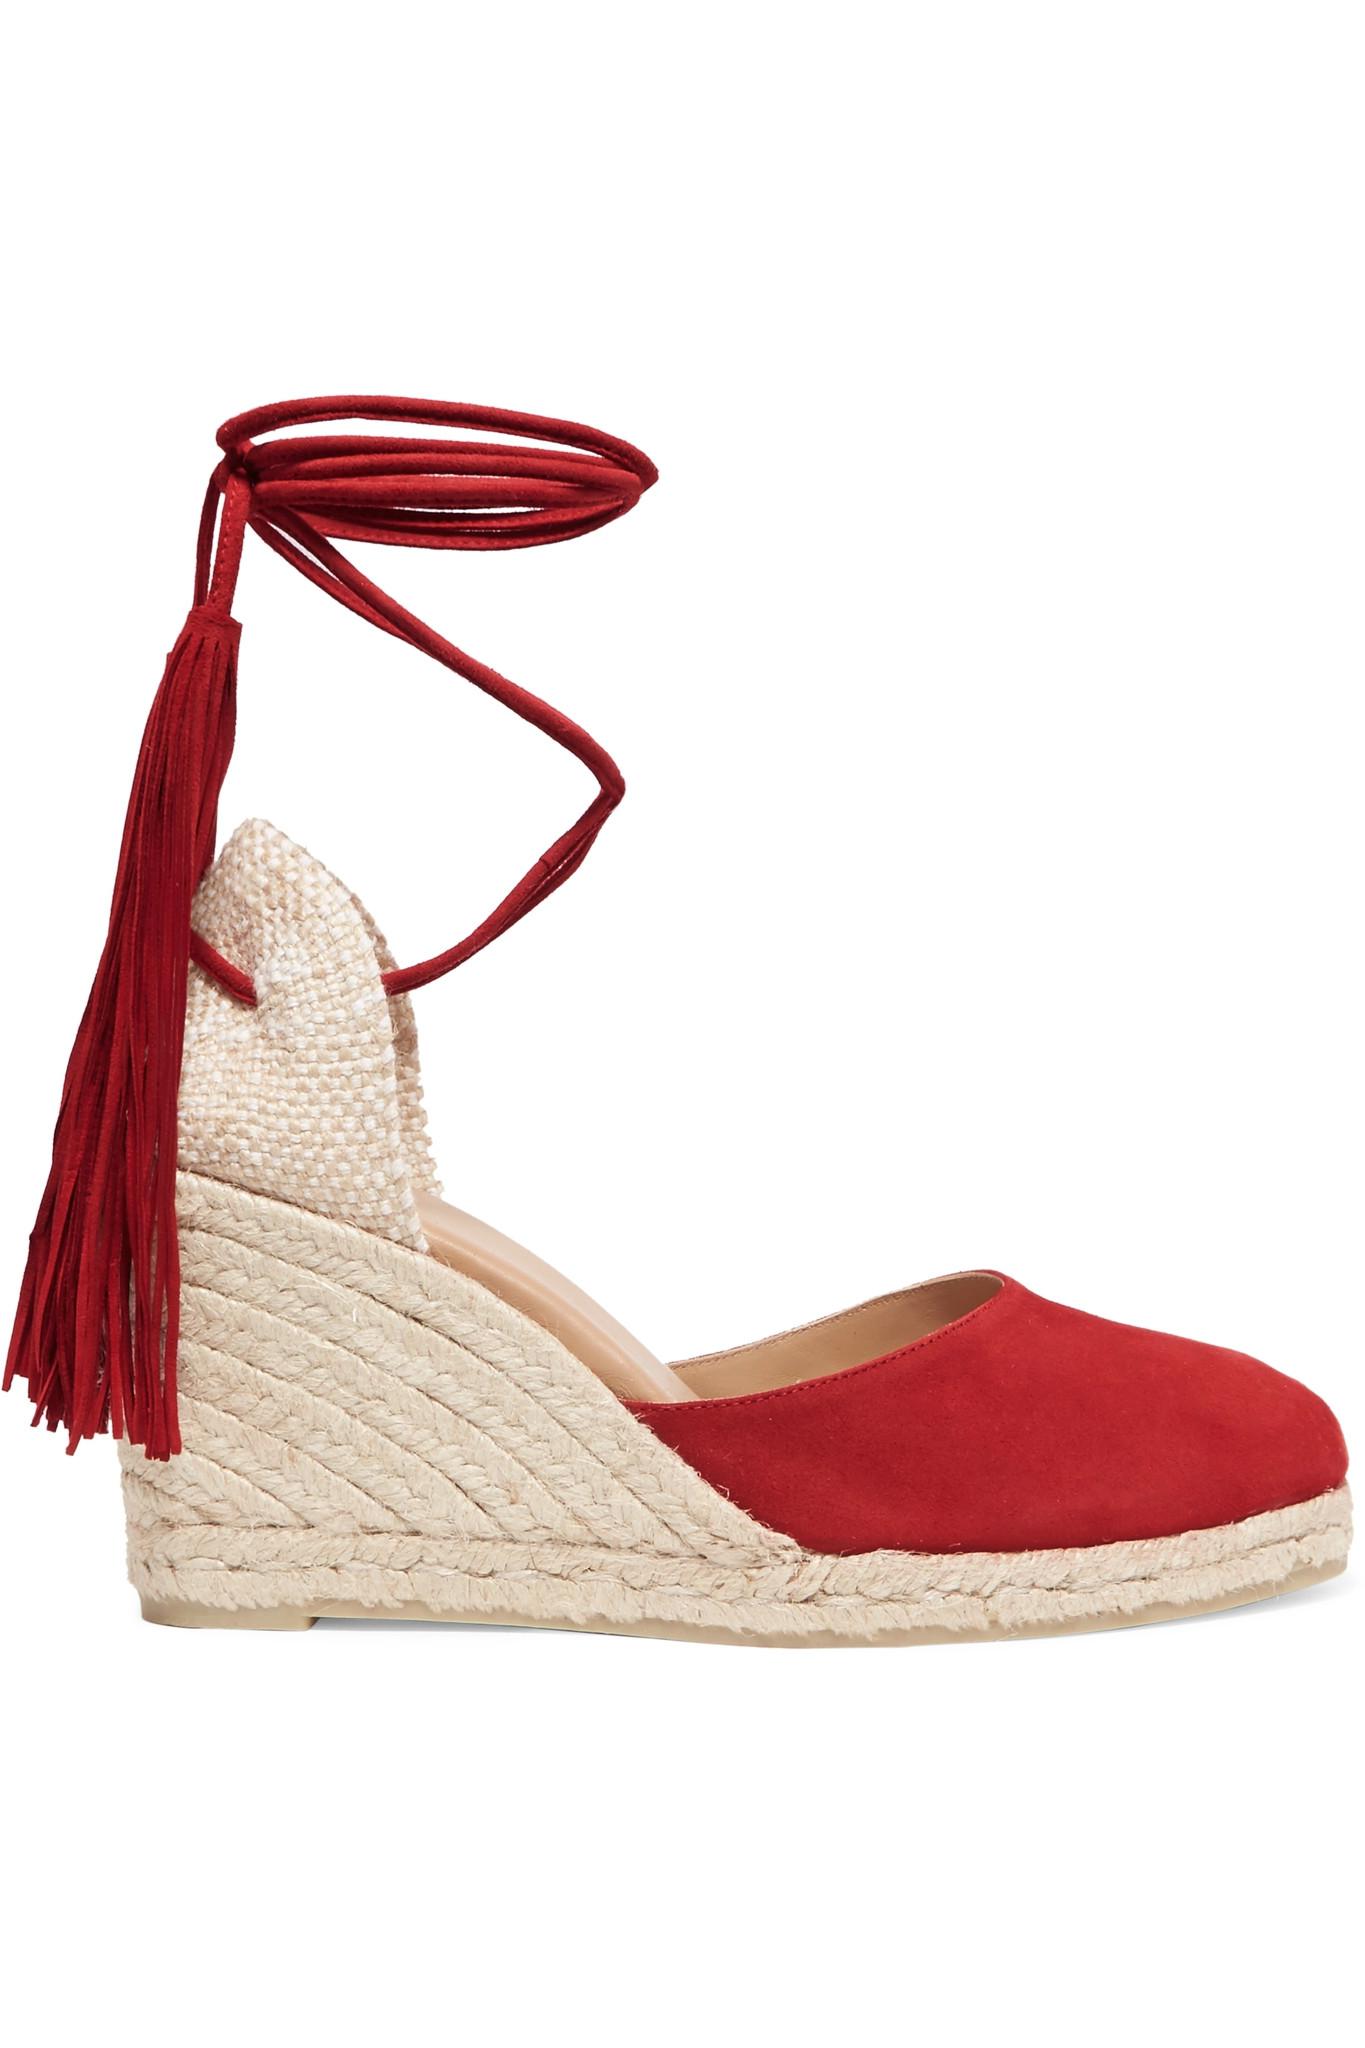 Castaner Carina Fringed Suede Wedge Espadrilles in Red - Lyst